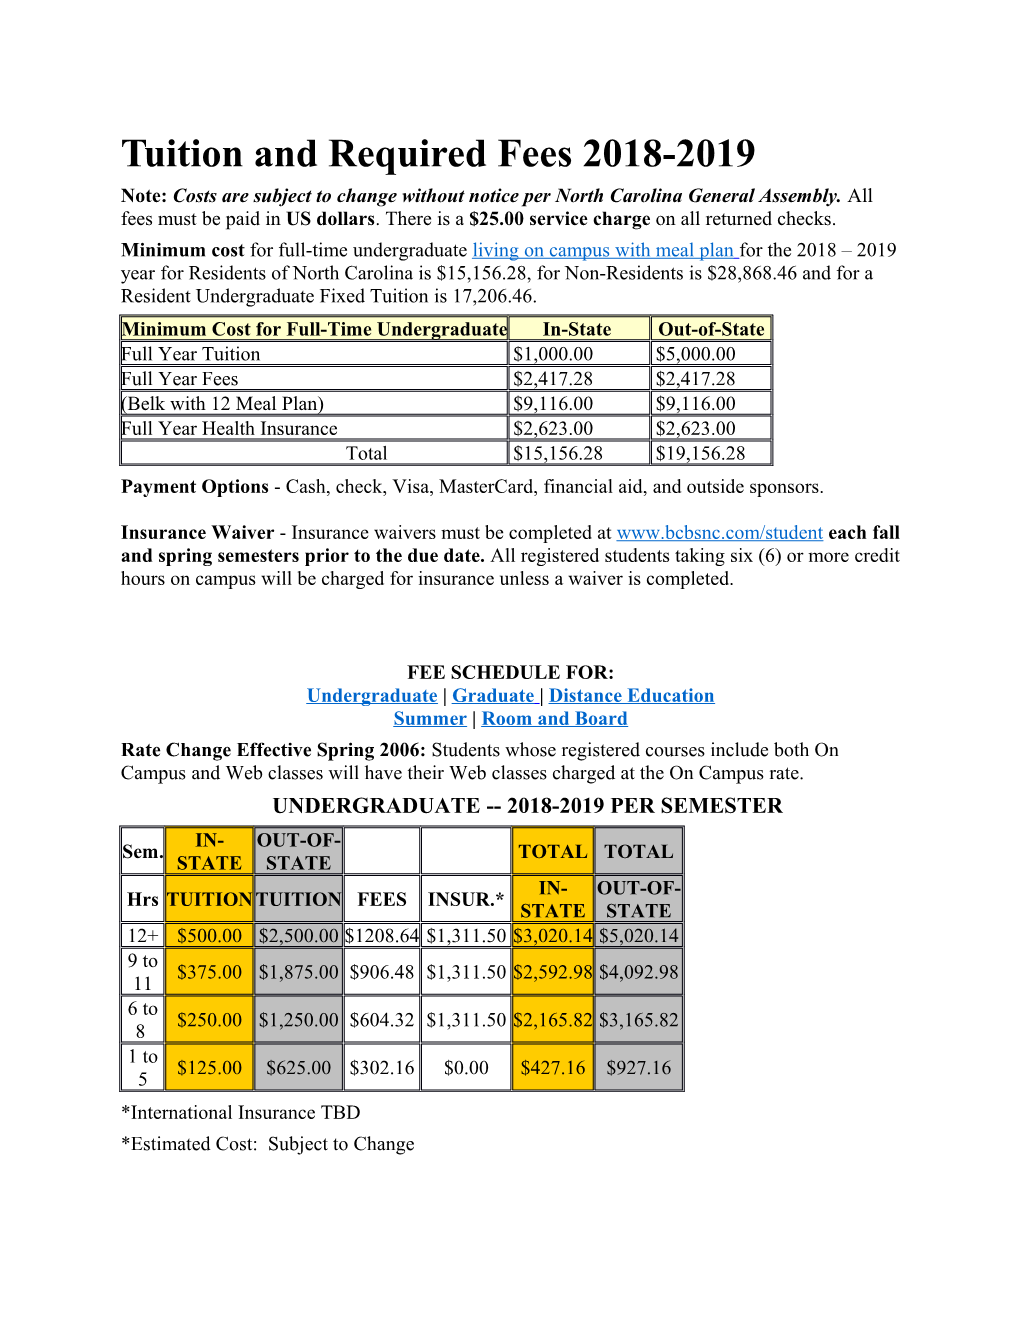 Tuition and Required Fees 2018-2019